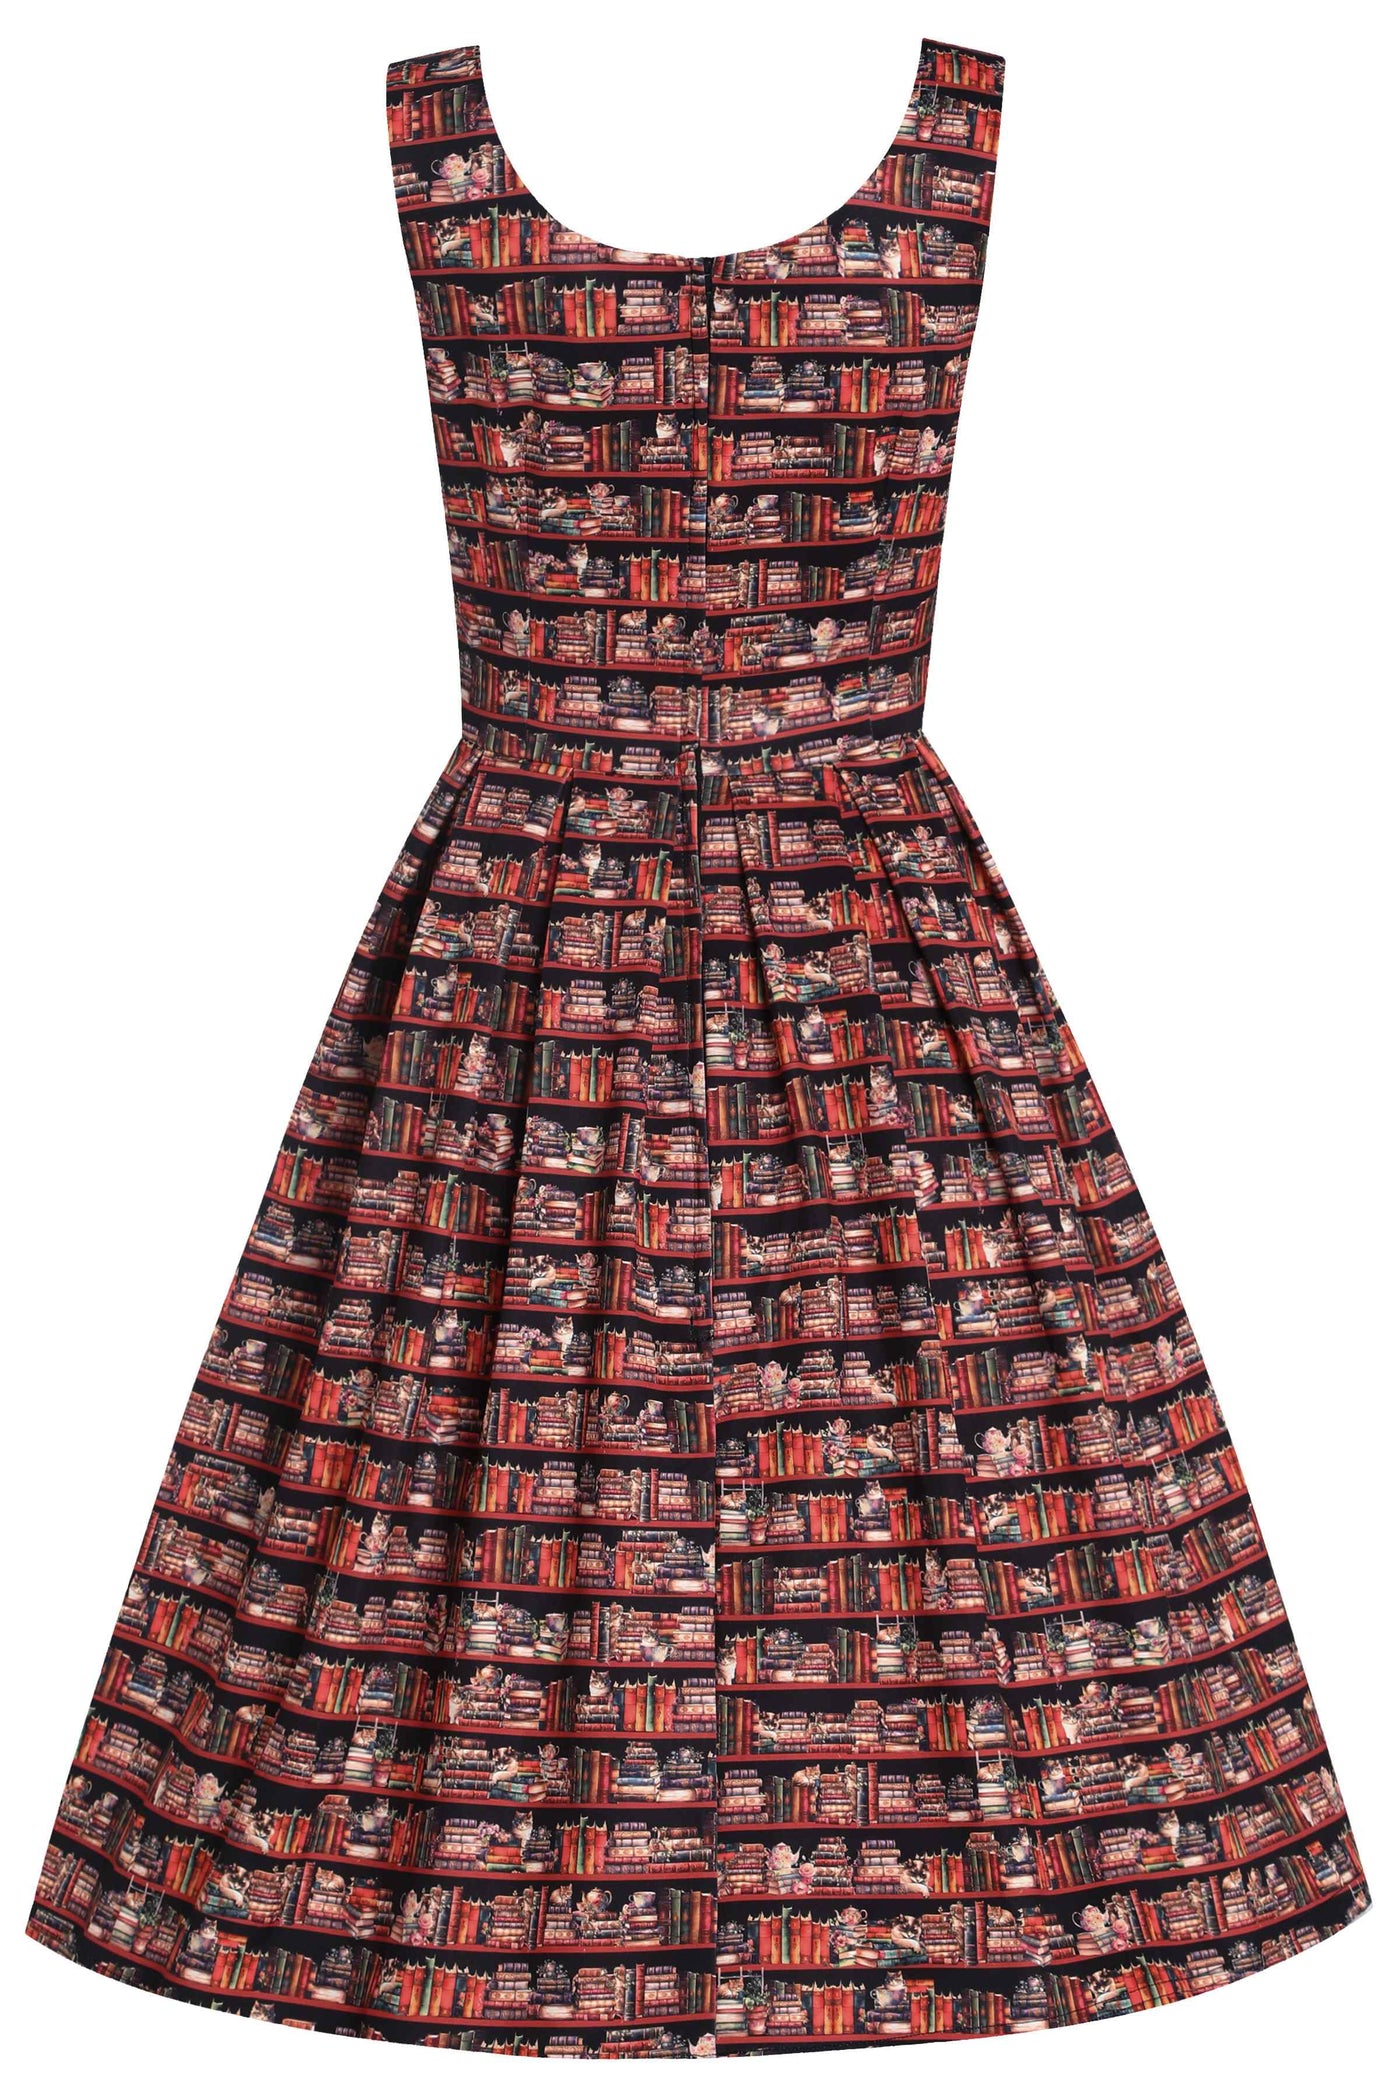 Back View of Cat and Book Swing Dress in Brown